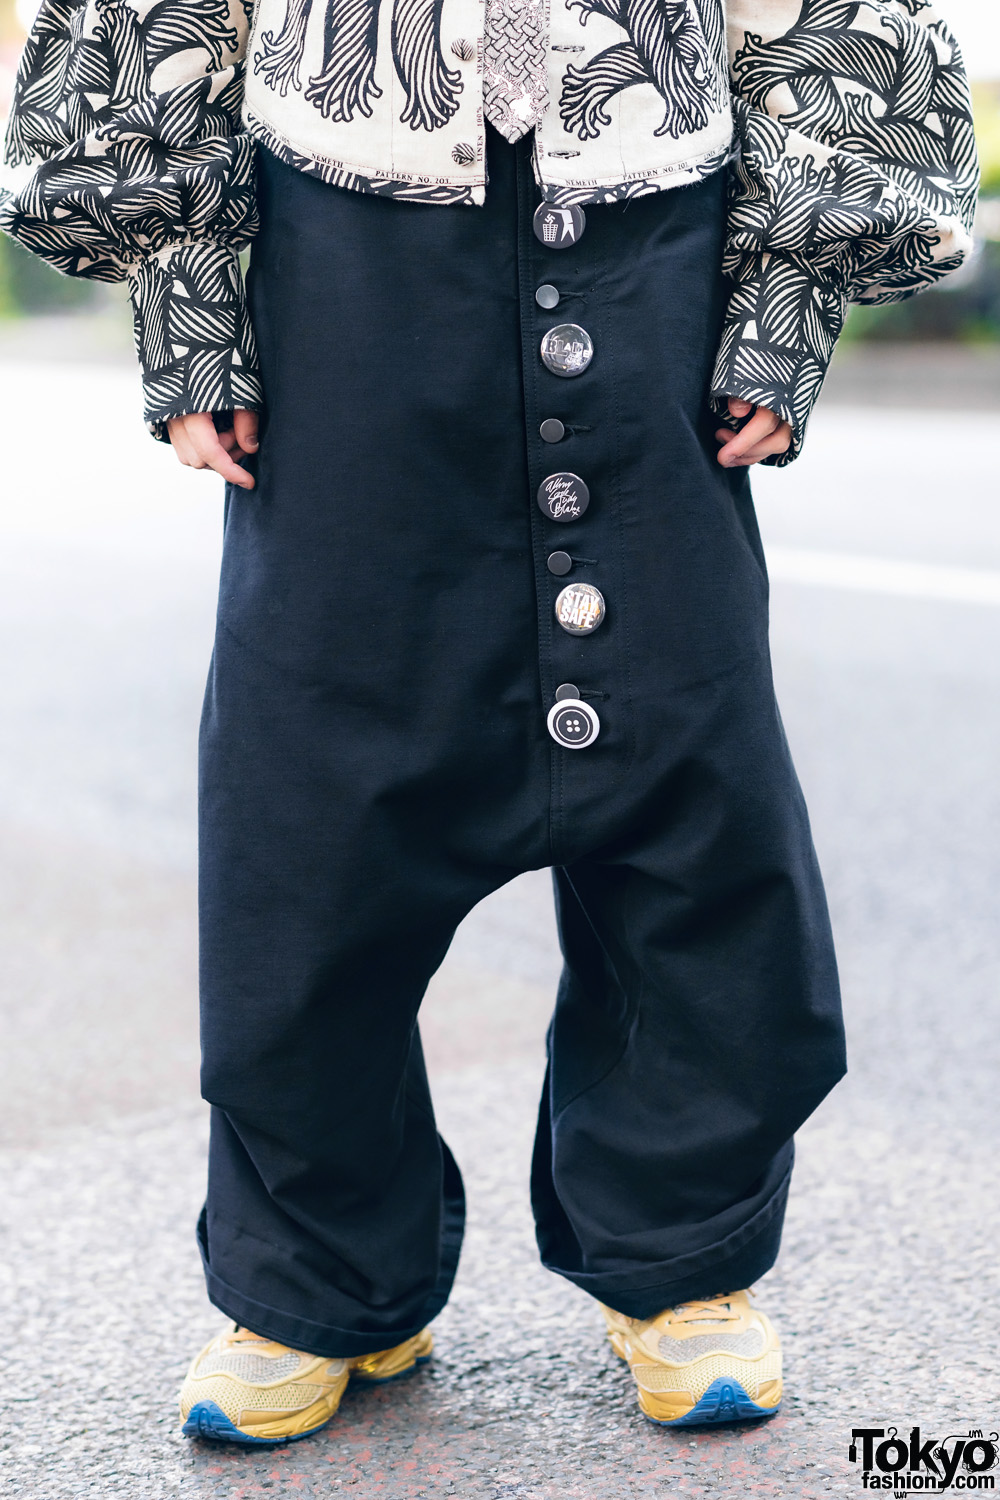 Christopher Nemeth Rope Print Streetwear in Harajuku w/ Collarless Jacket,  Button-Fly Pants, Lace-Up Shoes & Tot… in 2023